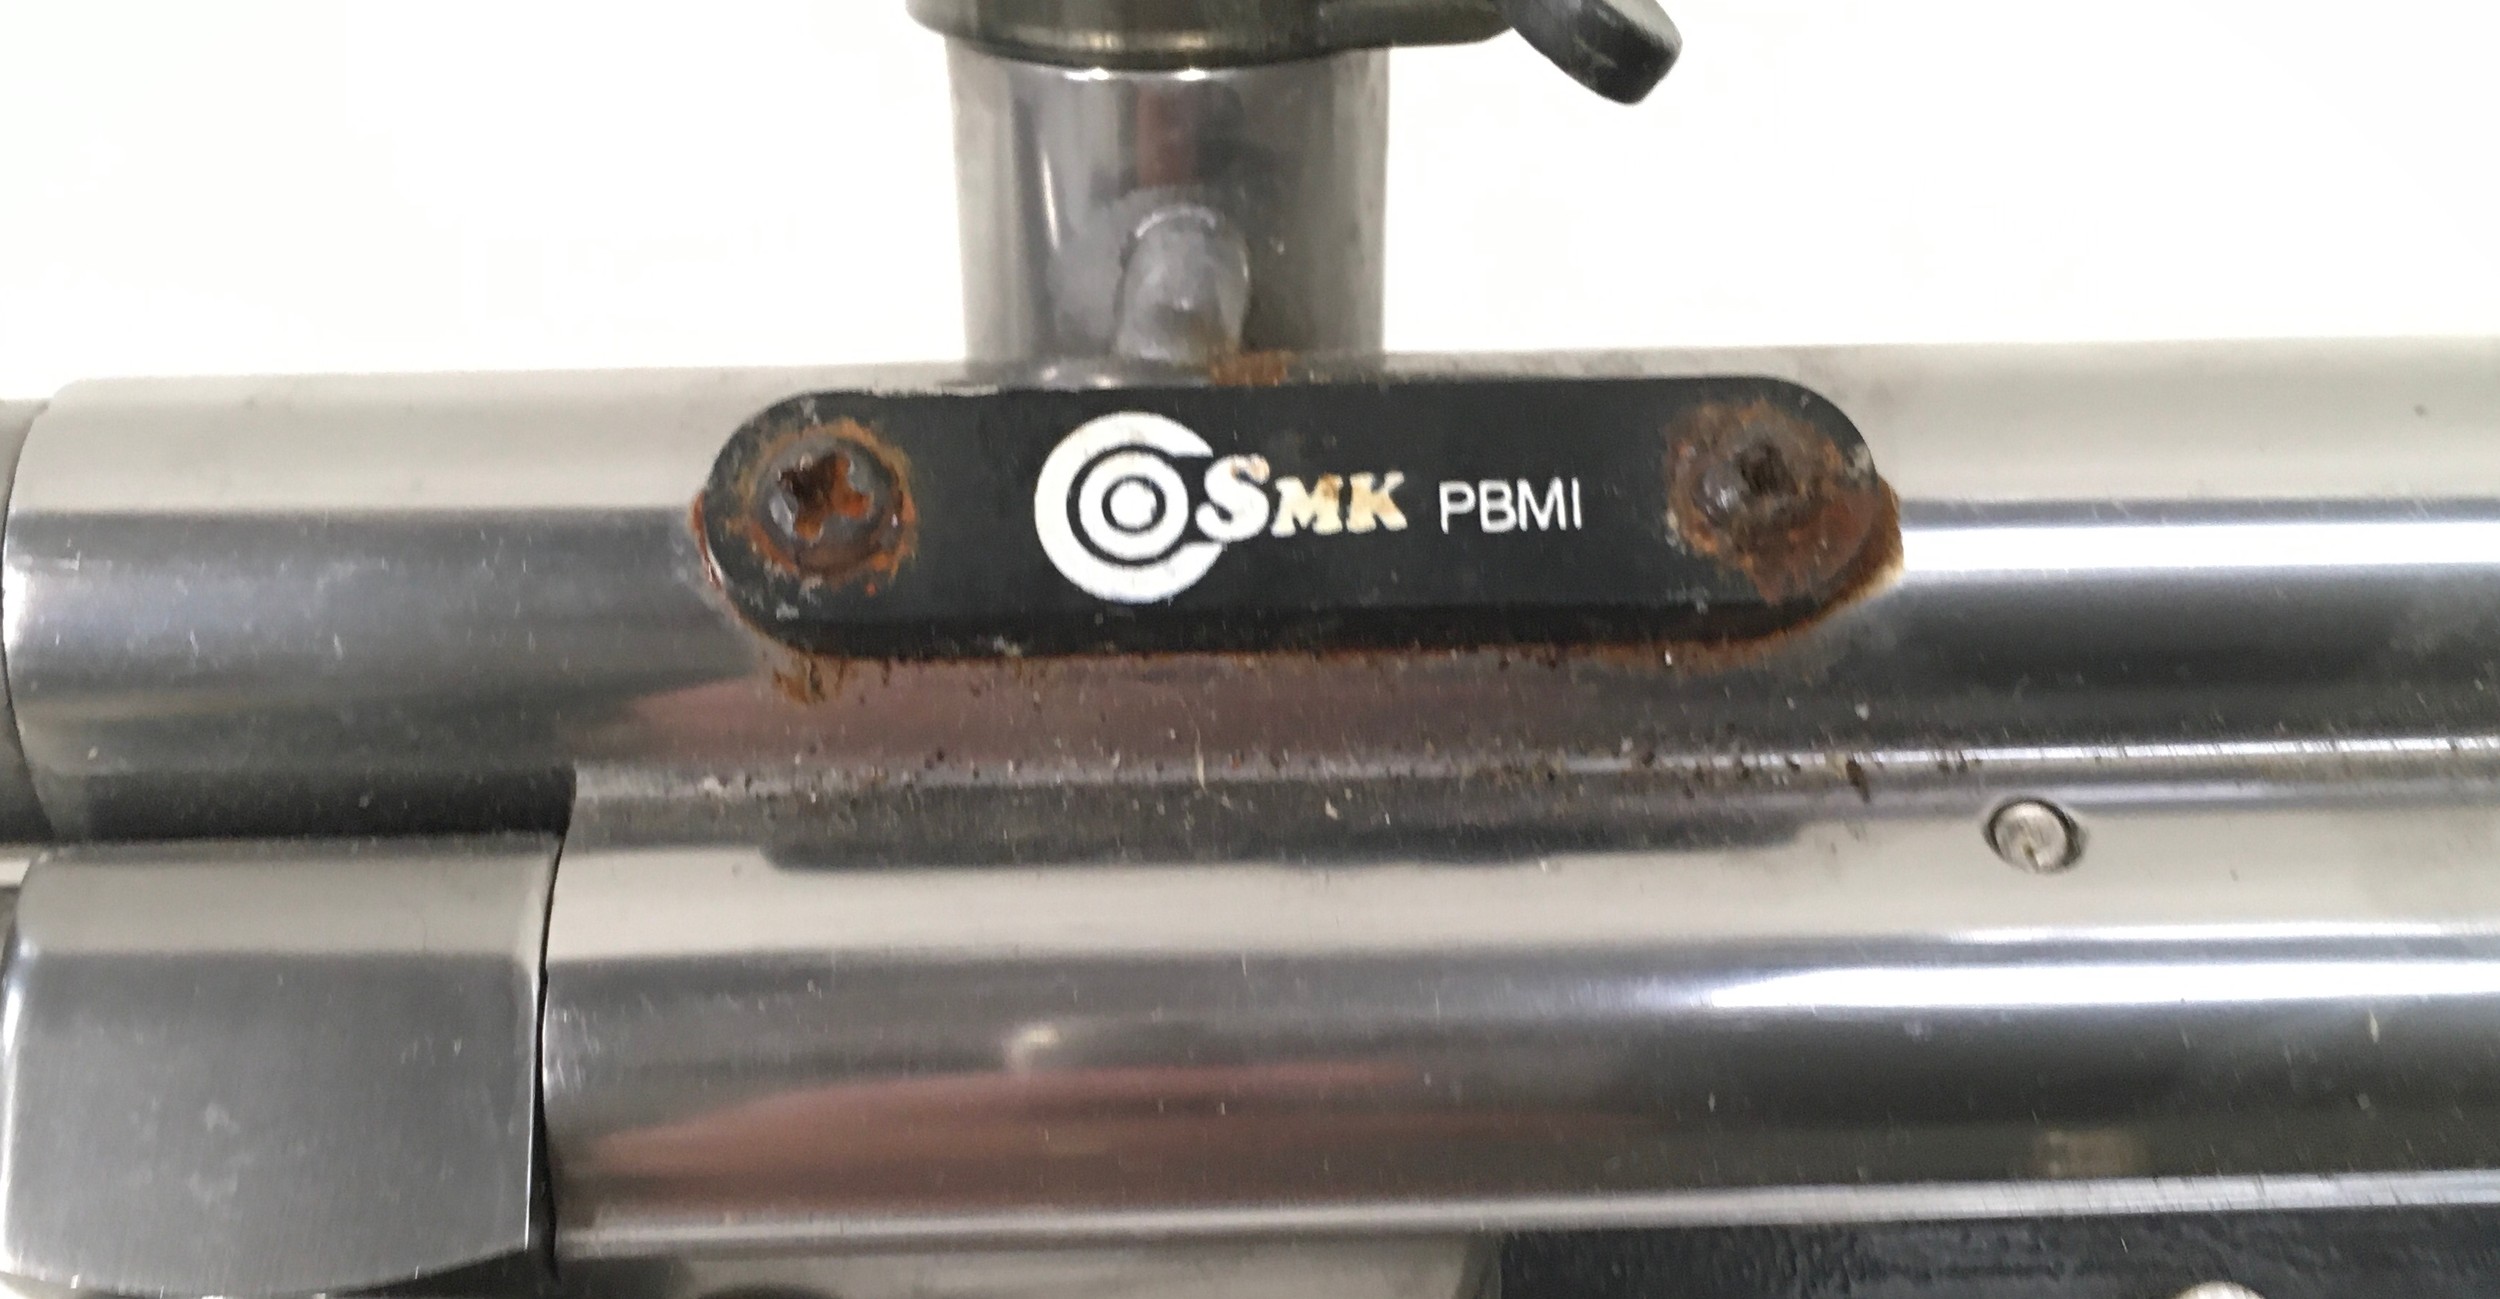 Paintball gun model SMK PBMI. with gas cartridge fitted. Appears to fire but ammo hopper missing. - Image 2 of 3